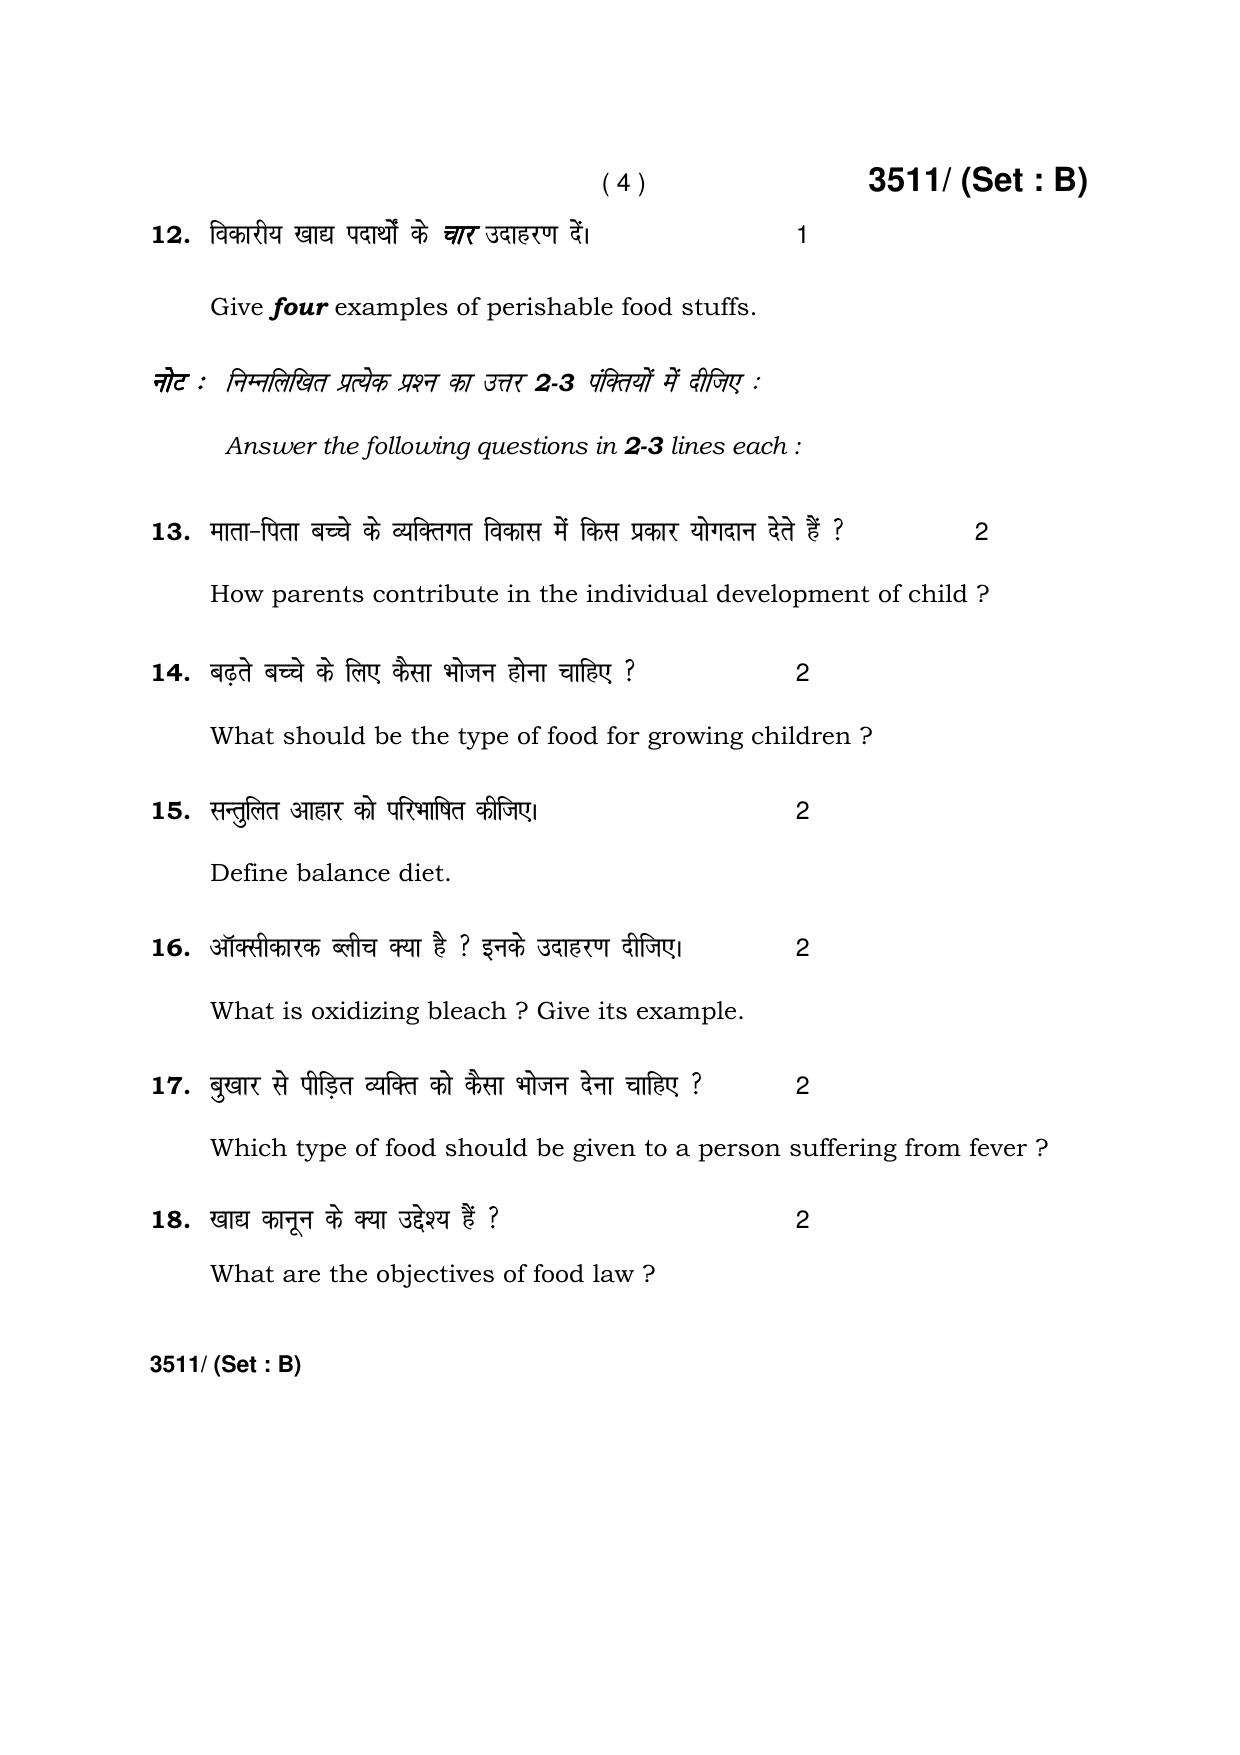 Haryana Board HBSE Class 10 Home Science -B 2018 Question Paper - Page 4